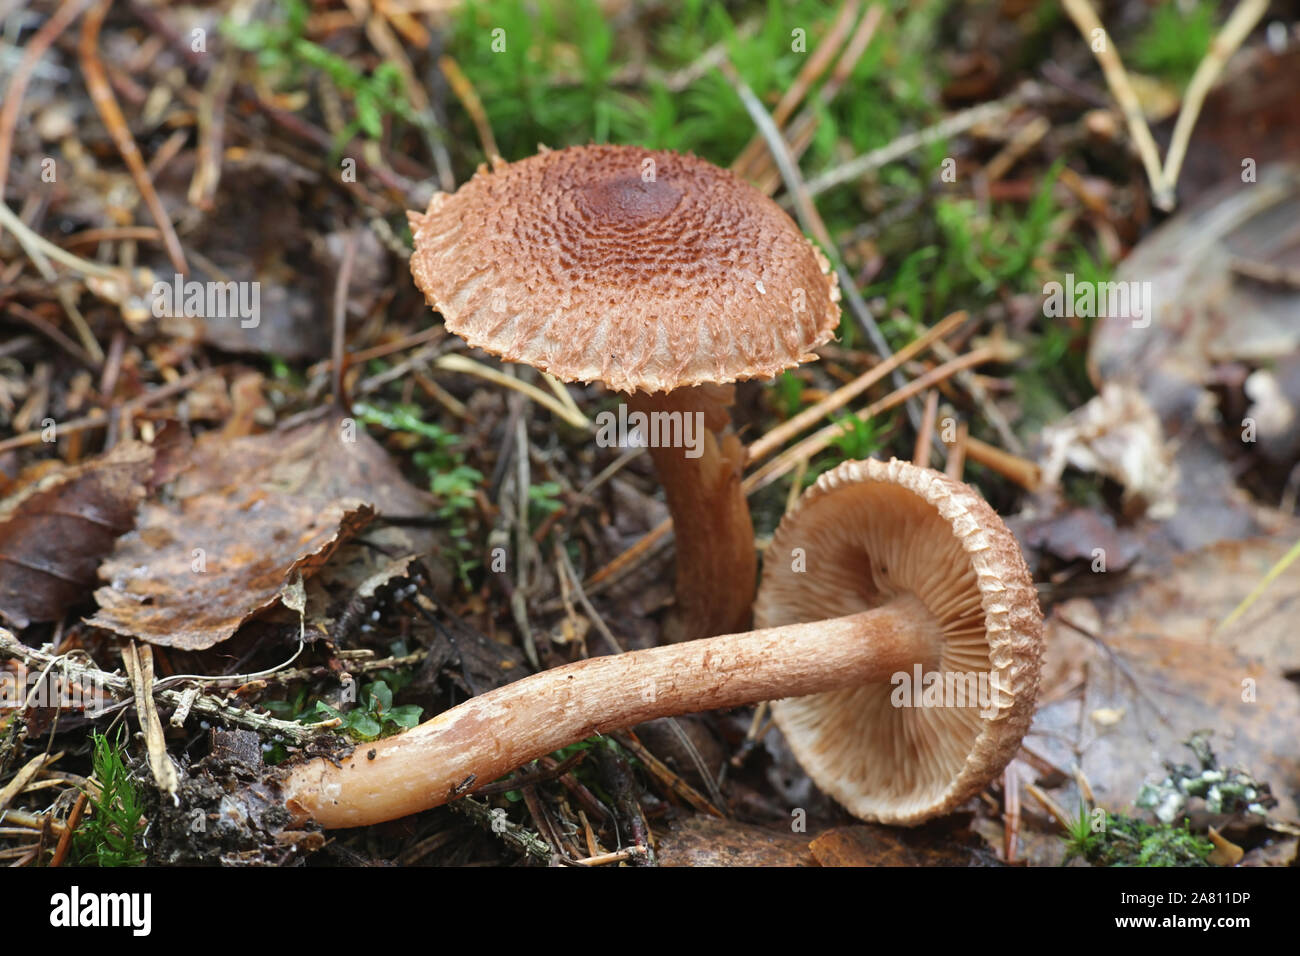 Tricholoma vaccinum, known as the russet scaly tricholoma, the scaly knight, or the fuzztop, wild mushroom from Finland Stock Photo